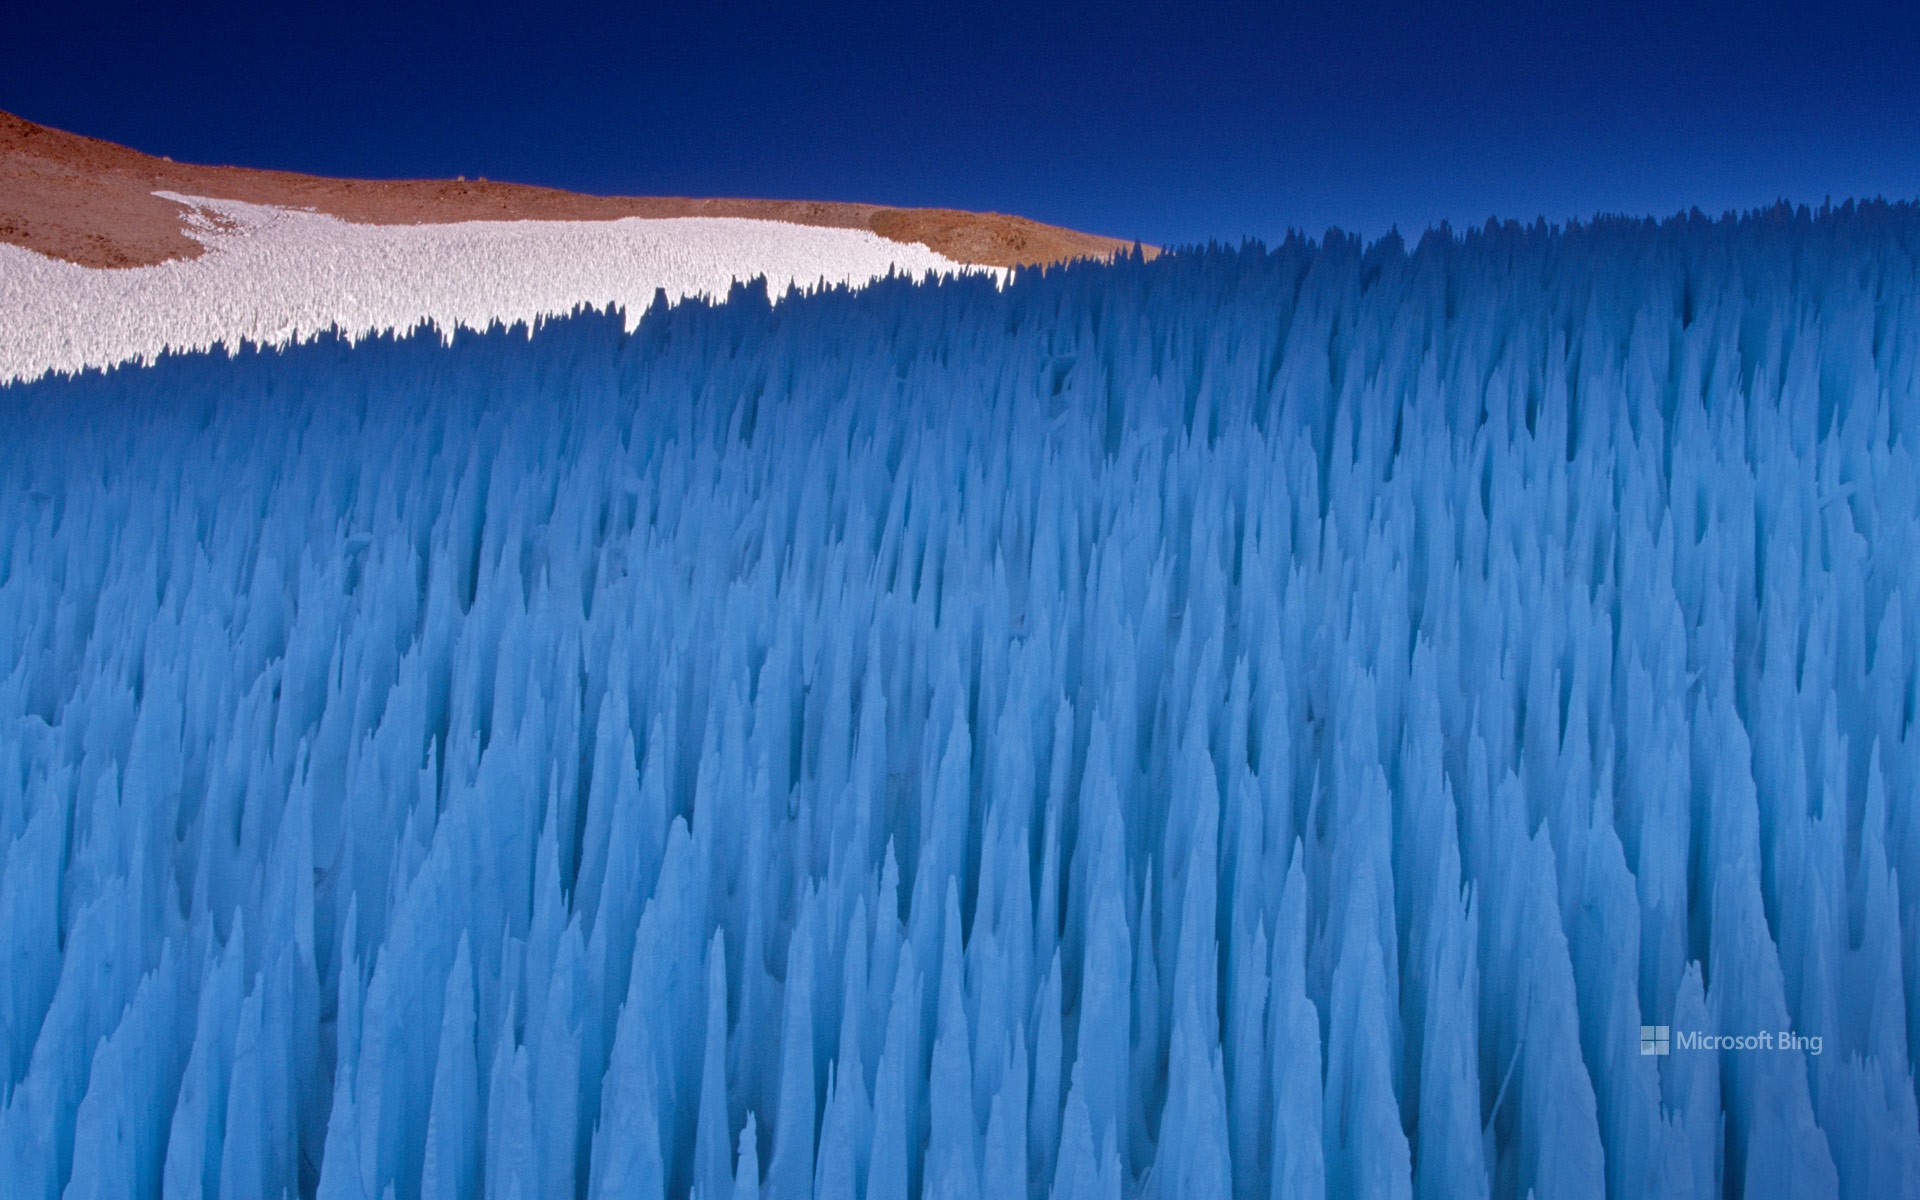 Nieve penitente ice formations seen on Agua Negra Pass in the Coquimbo Region of the Andes, Chile